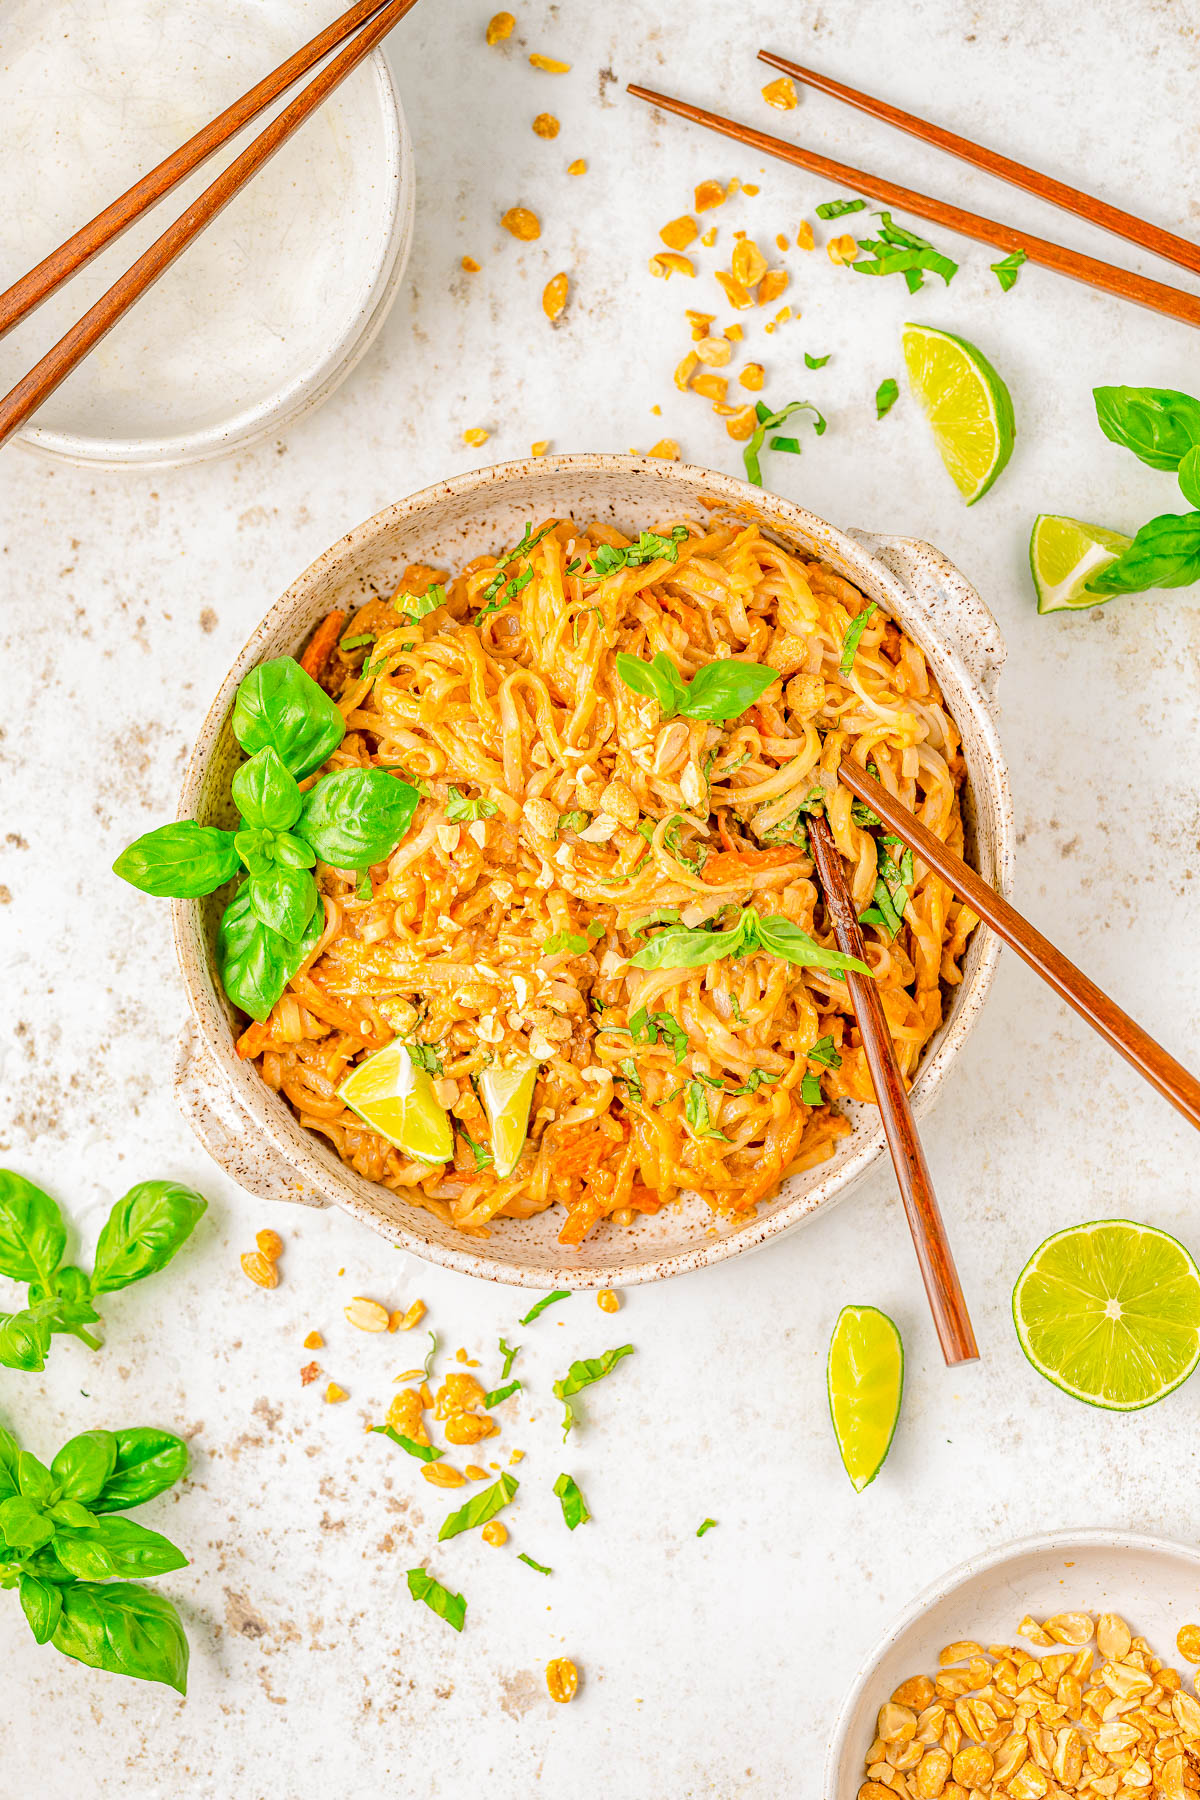 15-Minute Spicy Peanut Noodles - Drenched in spicy peanut sauce, this EASY recipe for peanut noodles is faster than calling for takeout! Homemade peanut sauce is amped up with sesame oil, ginger, soy, sriracha, and tossed with rice noodles for a great quick and easy lunch or busy weeknight dinner. Vegetarian and gluten-free comfort food that'll keep you satisfied for hours! Adding your favorite protein is always welcome.